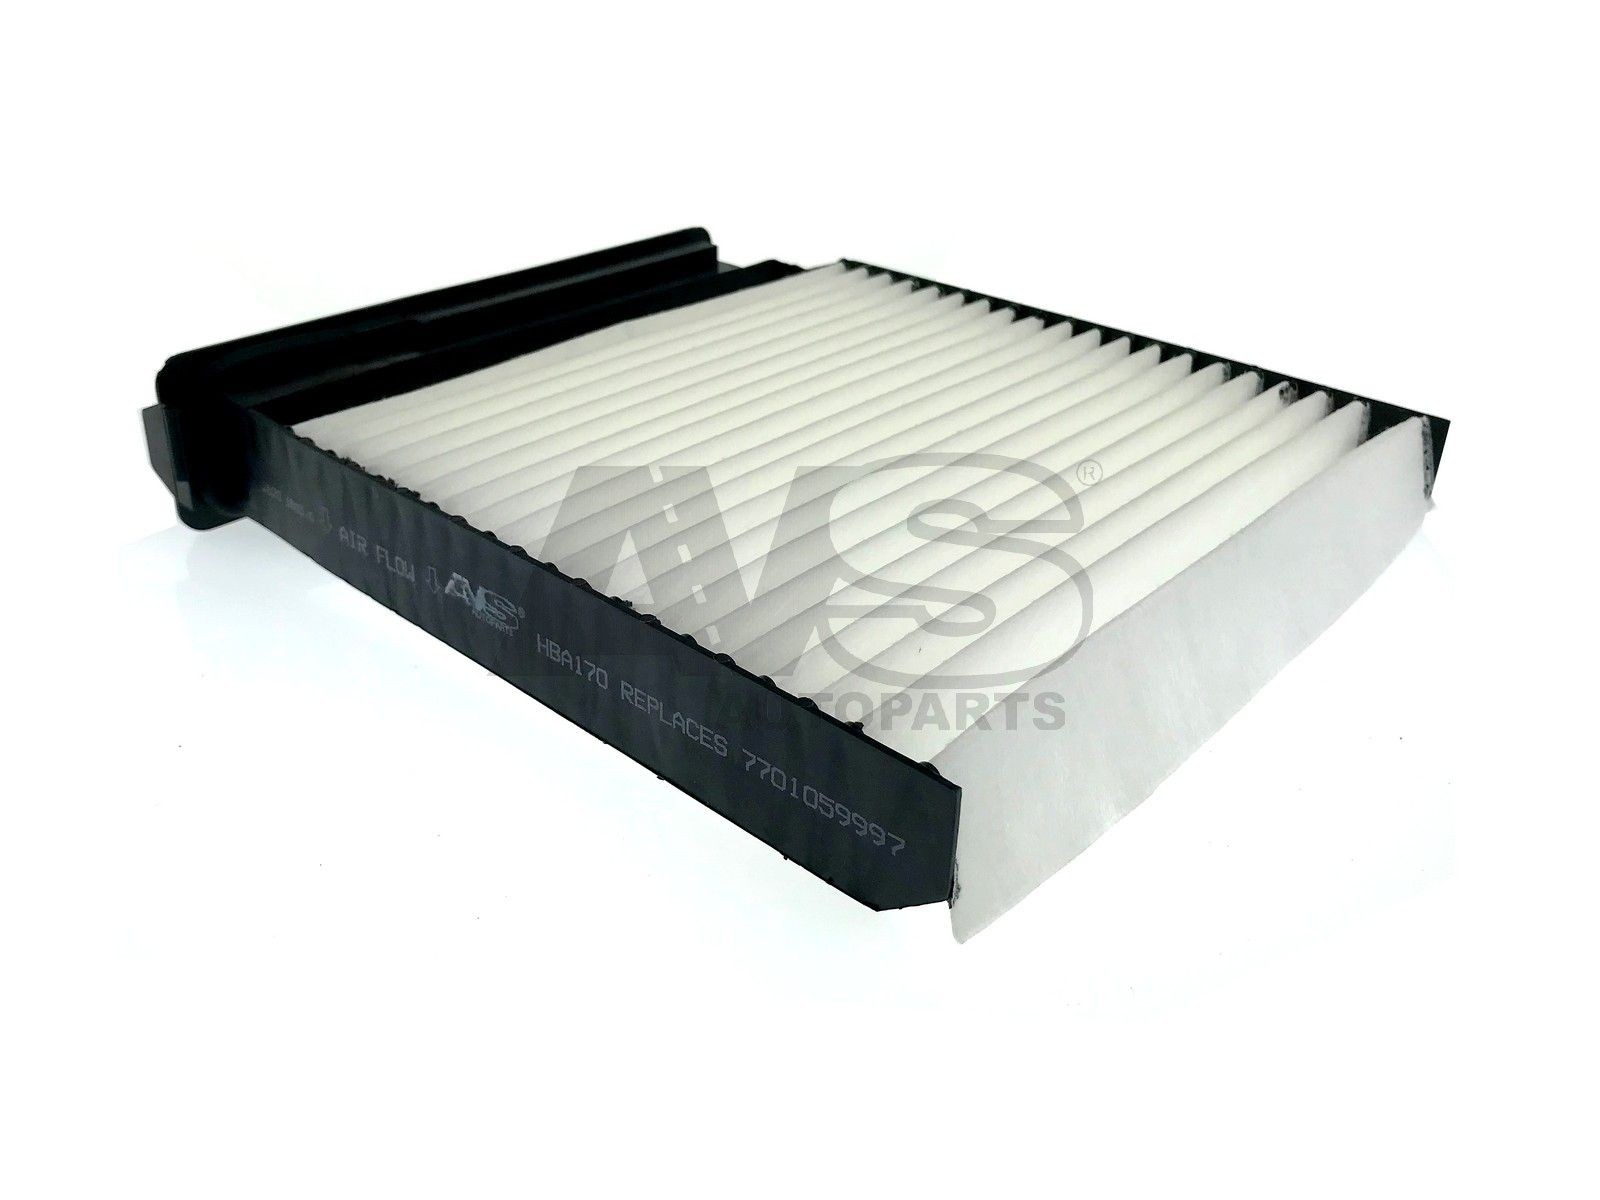 AVS AUTOPARTS Air conditioning filter HBA170